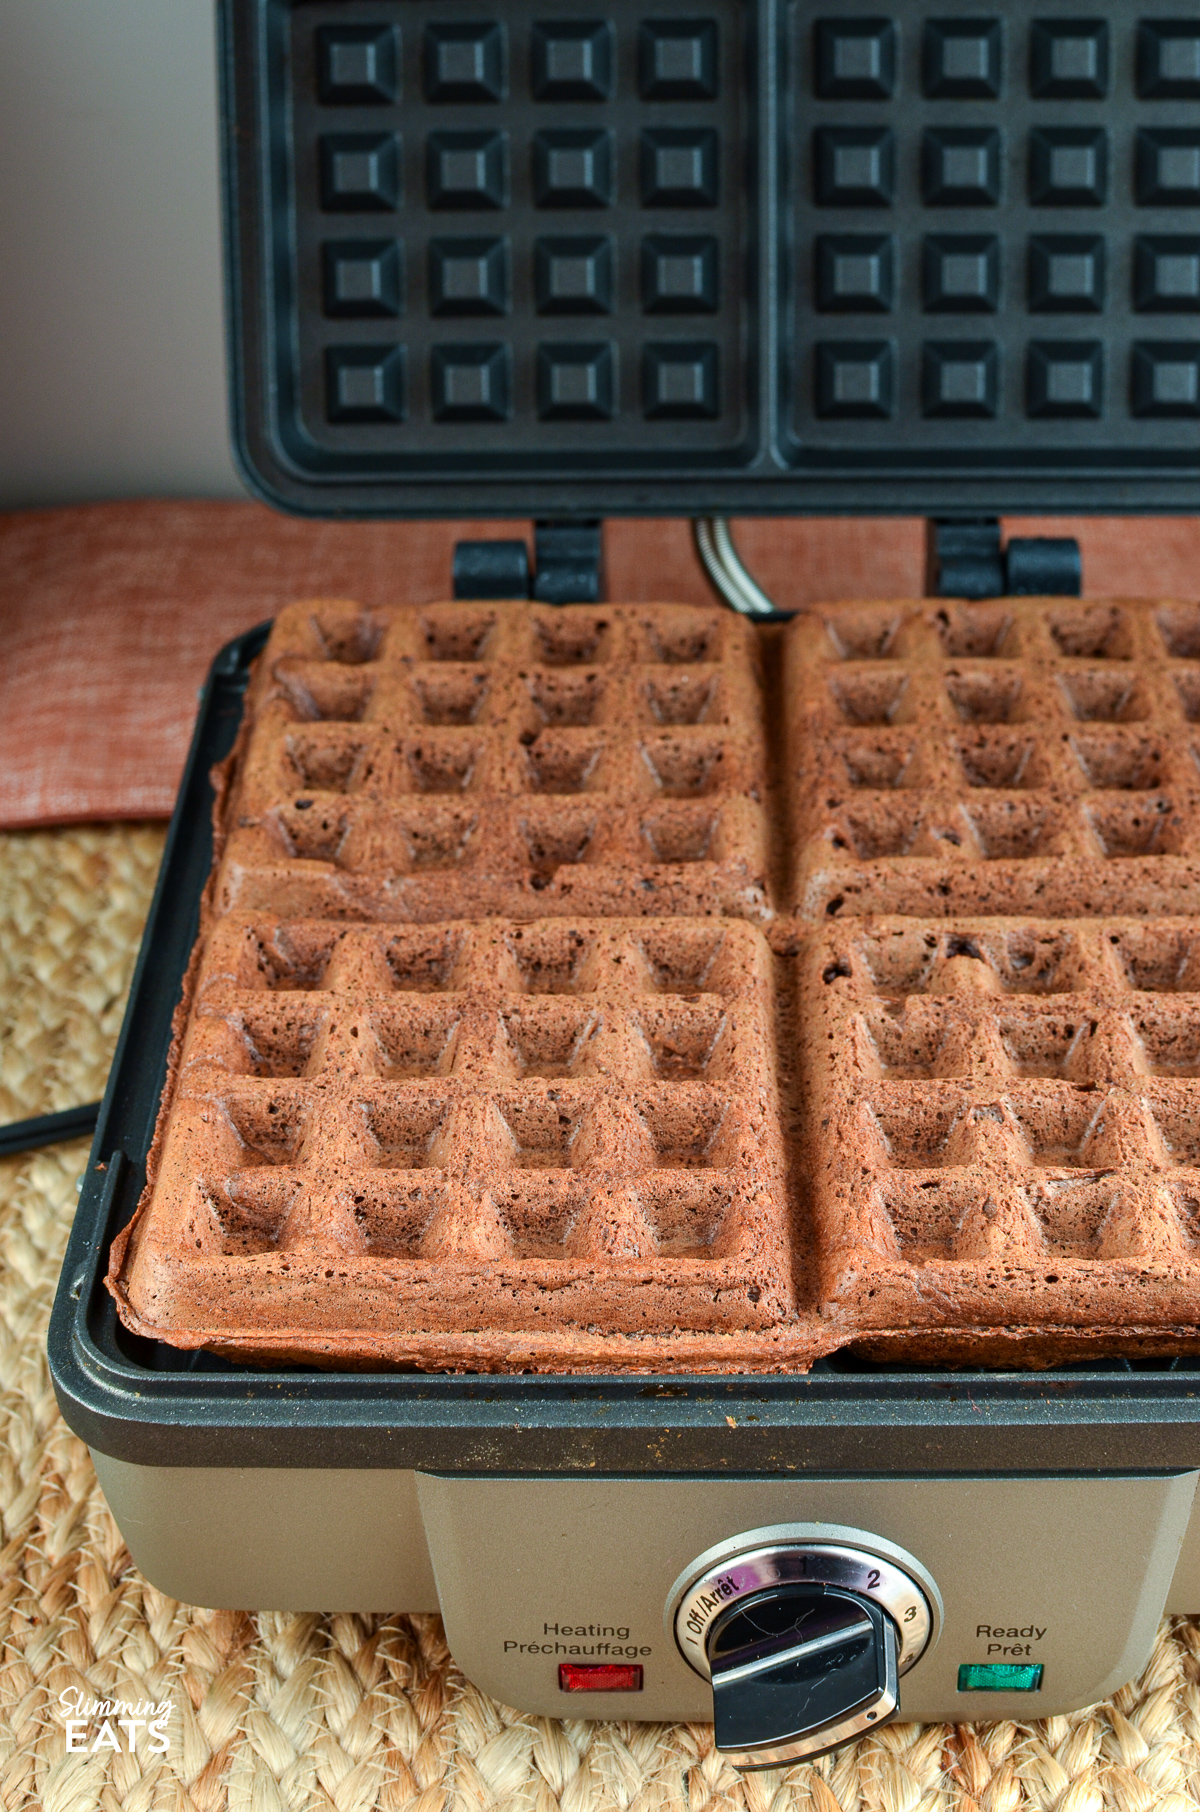 Four square oat chocolate banana waffles freshly cooked and ready to be served.